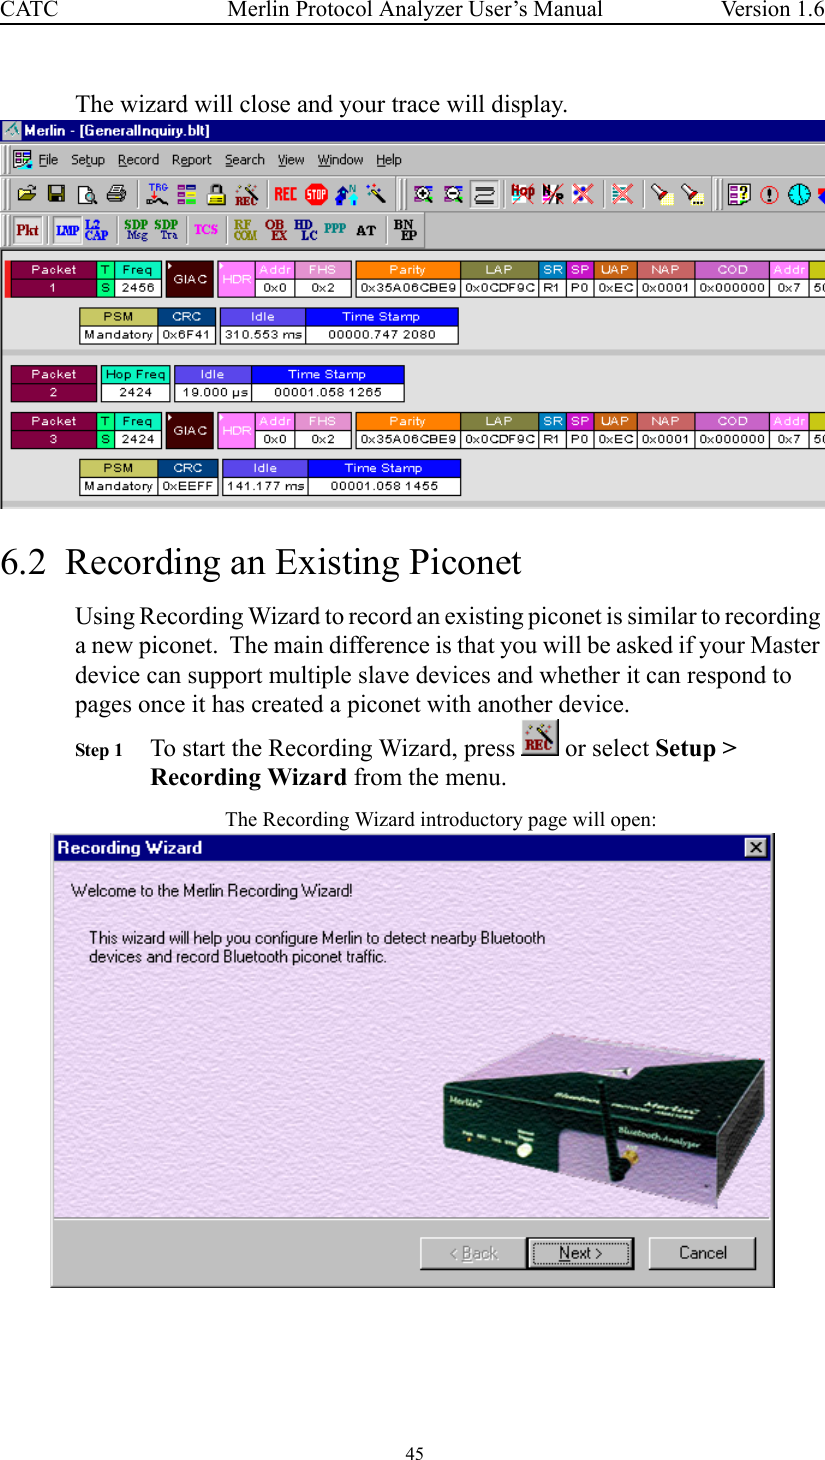  45 Merlin Protocol Analyzer User’s ManualCATC Version 1.6The wizard will close and your trace will display. 6.2  Recording an Existing Piconet Using Recording Wizard to record an existing piconet is similar to recording a new piconet.  The main difference is that you will be asked if your Master device can support multiple slave devices and whether it can respond to pages once it has created a piconet with another device.Step 1 To start the Recording Wizard, press   or select Setup &gt; Recording Wizard from the menu.The Recording Wizard introductory page will open: